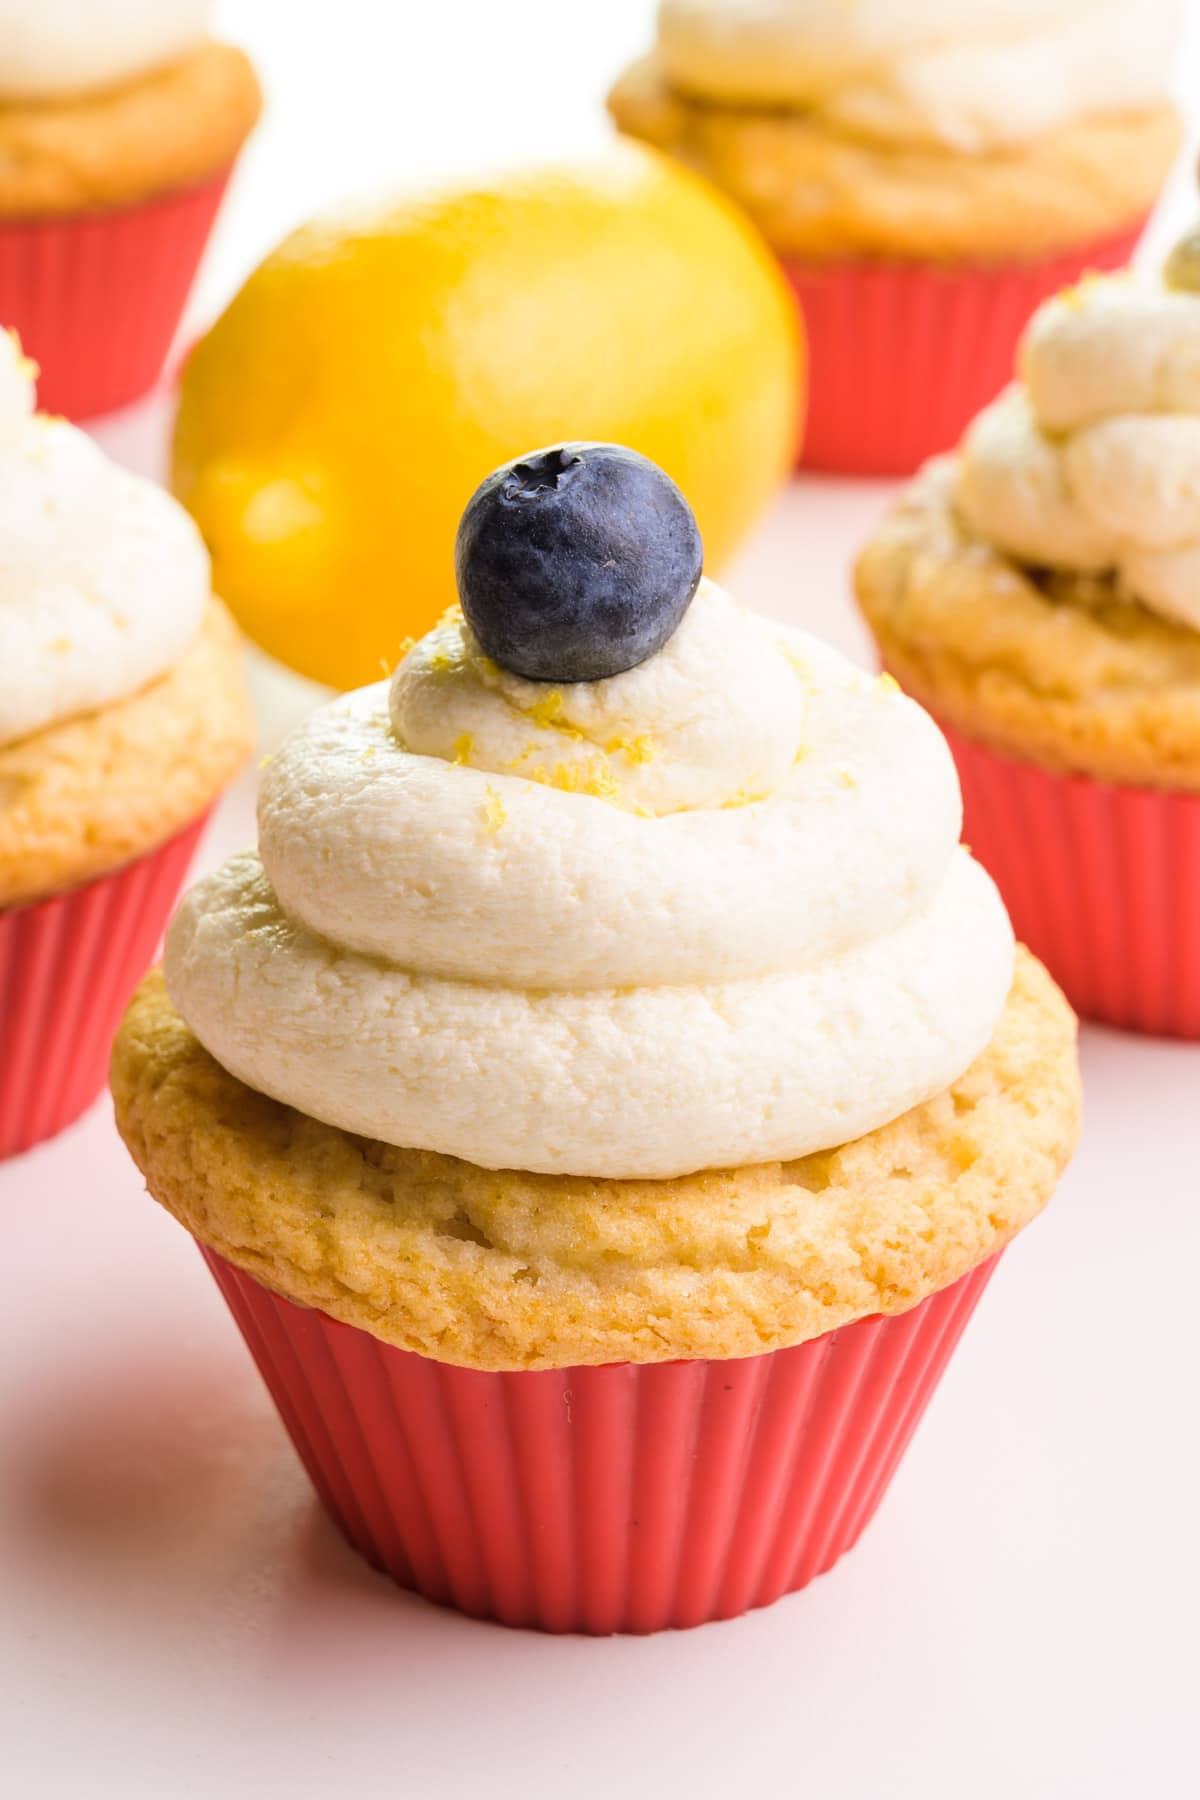 A cupcake topped with a blueberry and vegan lemon frosting with lemon zest.  In the background are more cupcakes and a lemon.